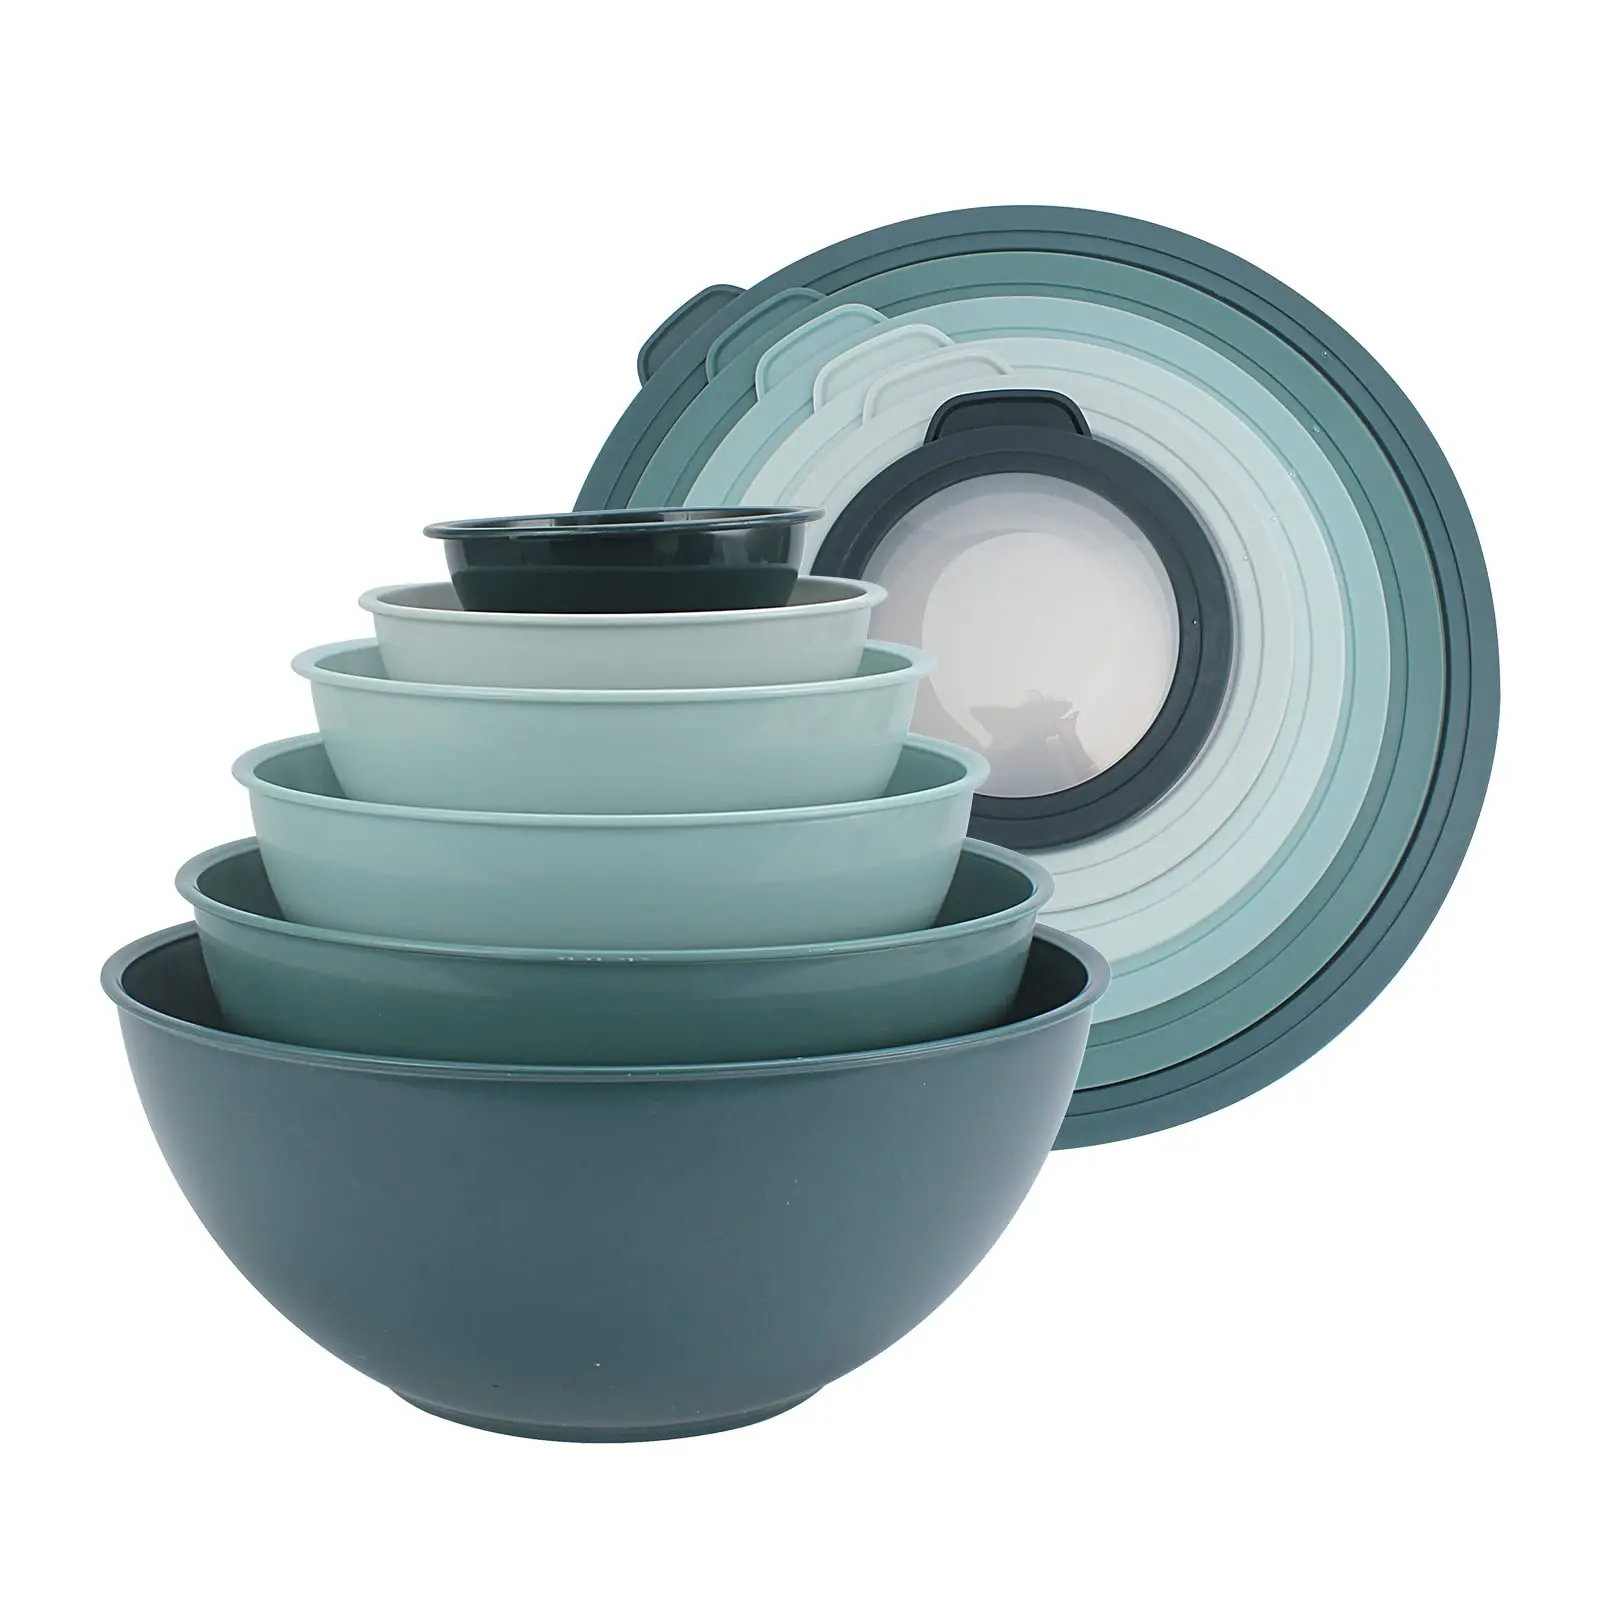 Mixing Bowls with TPR Lids - 12 Piece Plastic Nesting Bowls Set includes 6 Prep Bowls and 6 Lids Microwave Safe